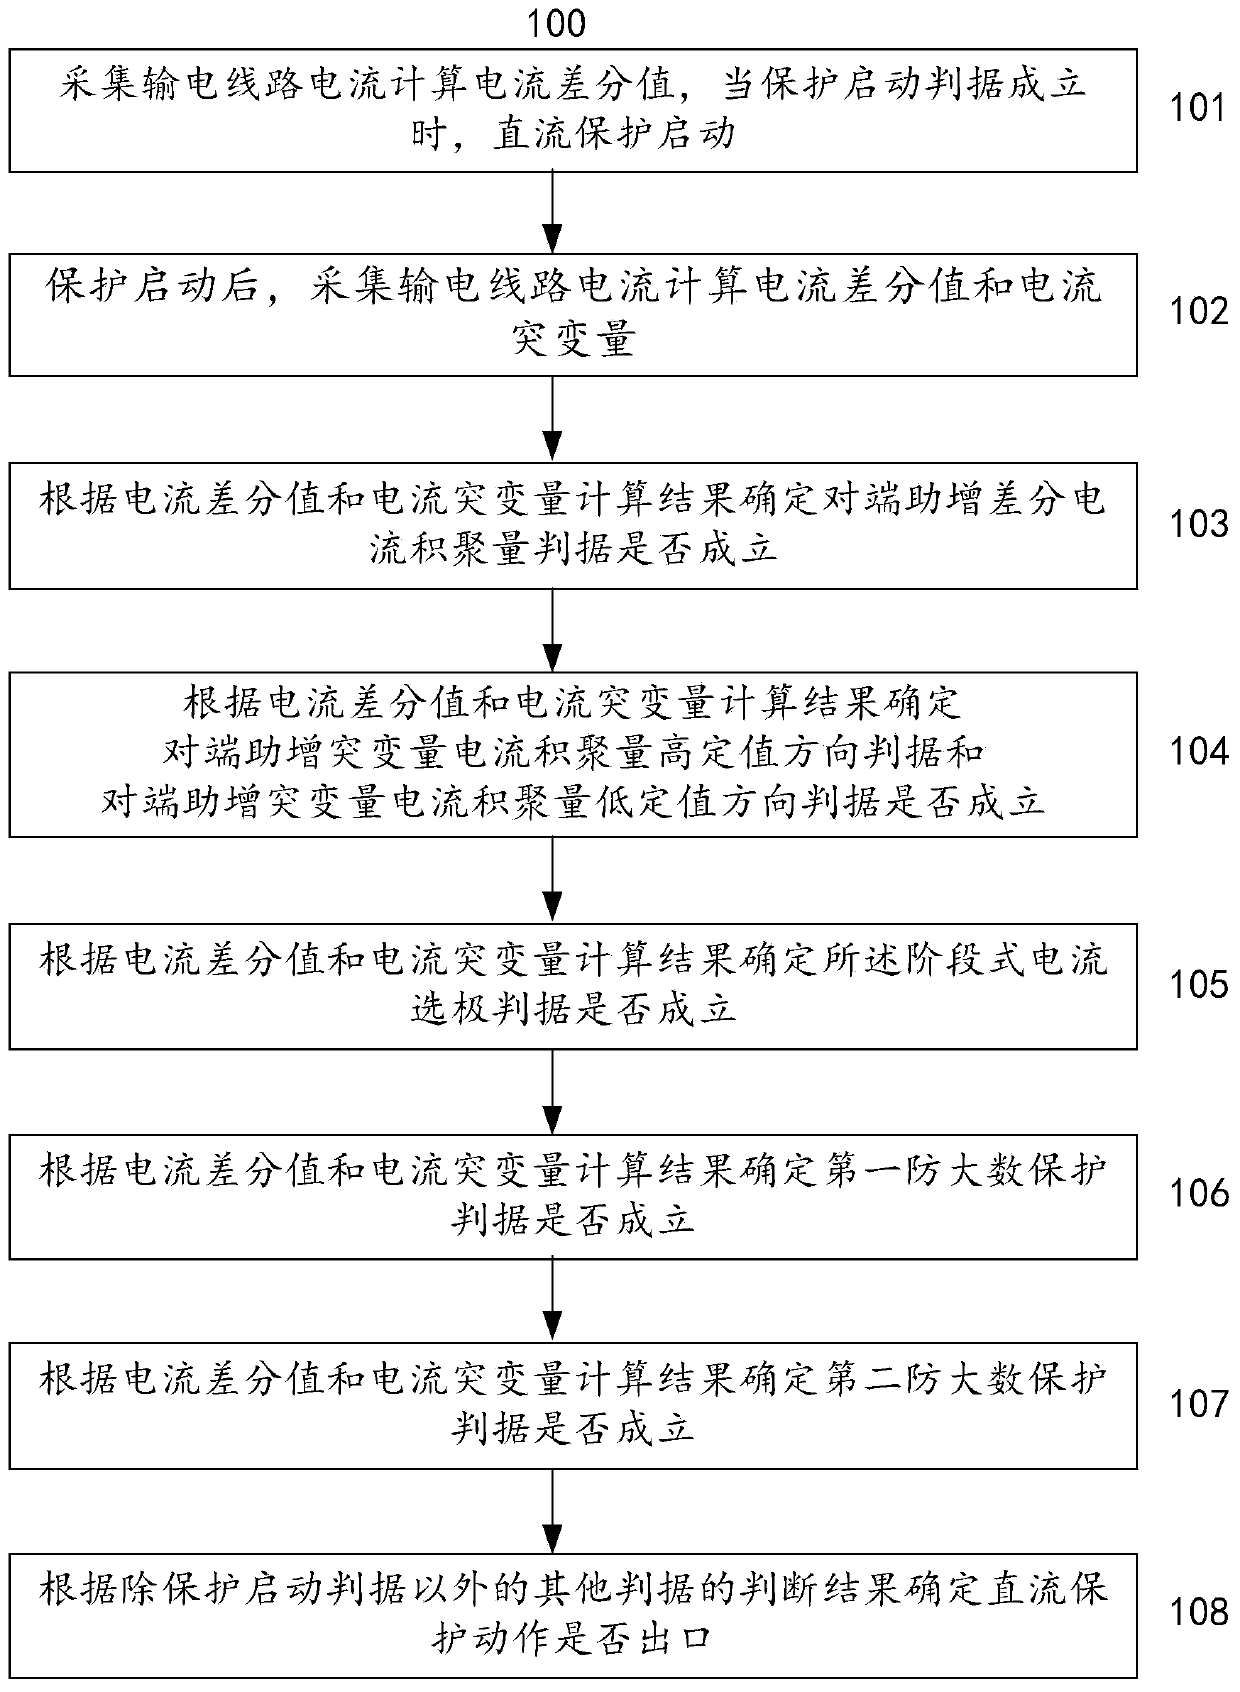 Direct-current transmission line protection method and system based on pure current characteristics